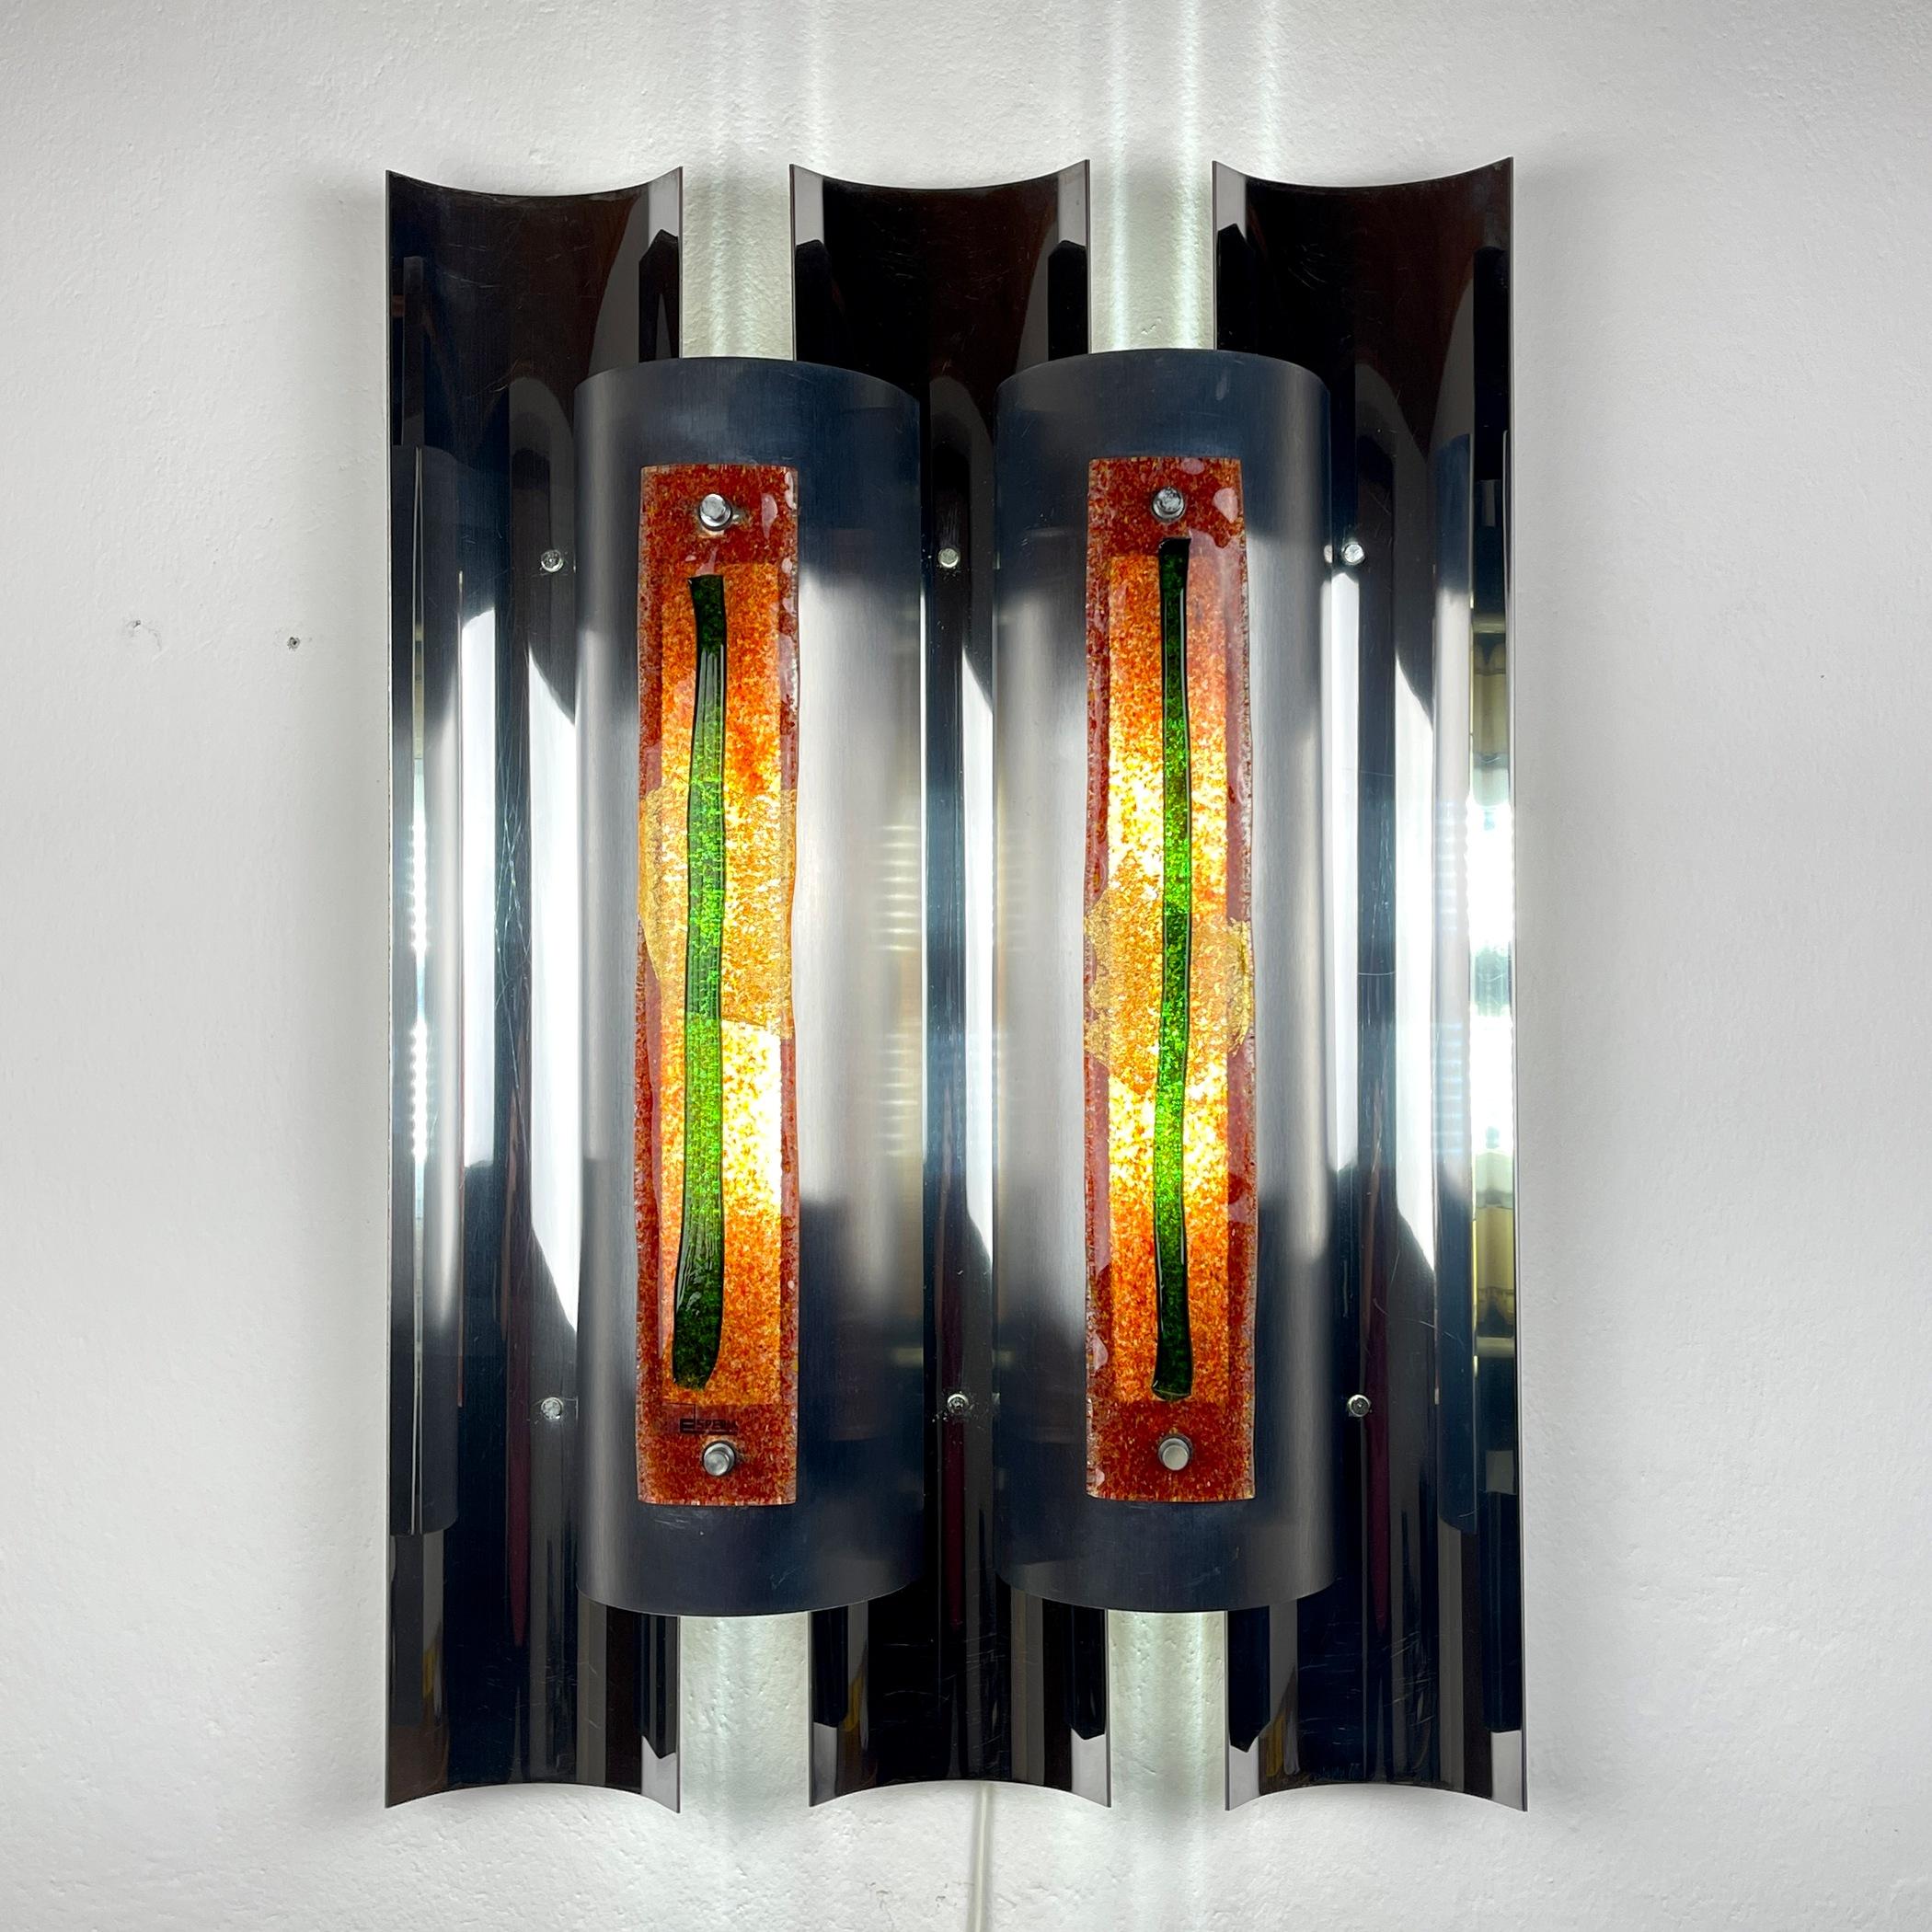 Introduce a statement piece to your interior with the imposing wall lamp designed by Angelo Brotto for Esperia in Italy during the 1970s. This substantial fixture embodies the essence of mid-century modern design and represents a quintessential